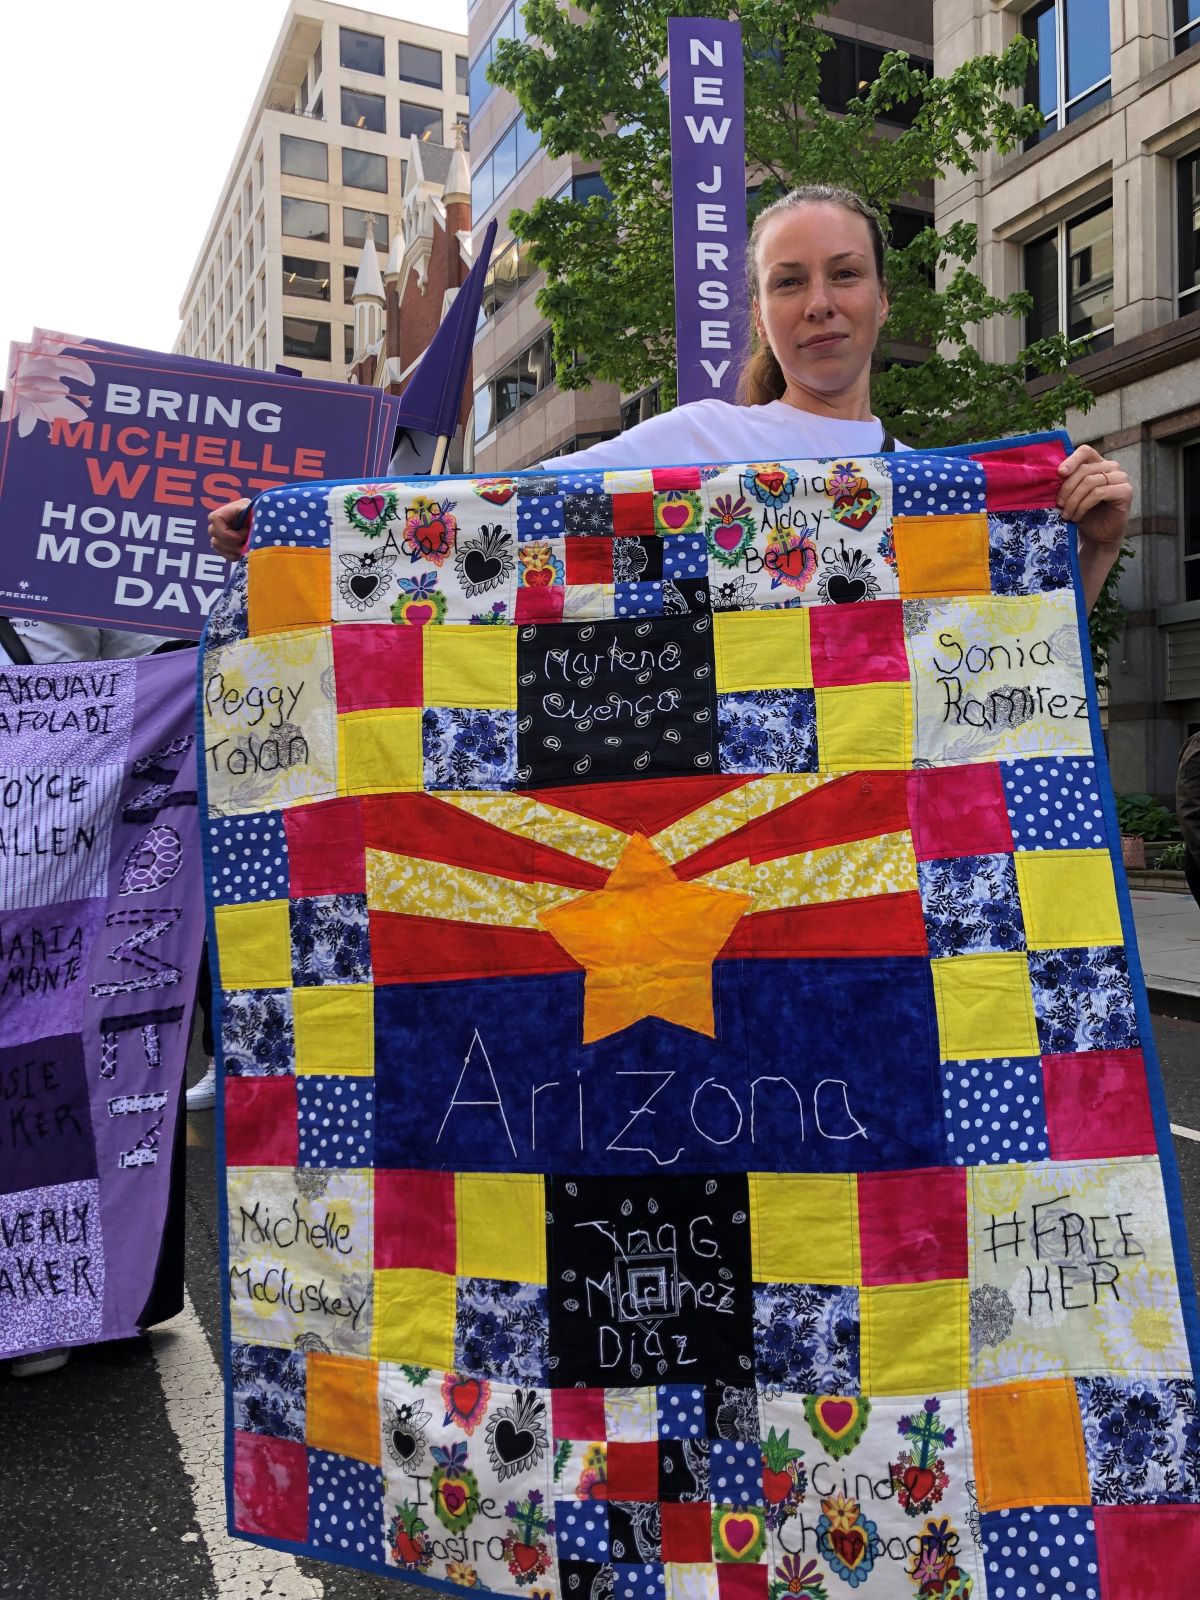 A woman proudly holds a quilt which reads "Arizona" in the middle with the names of various woman inmates on some of the quilt's squares